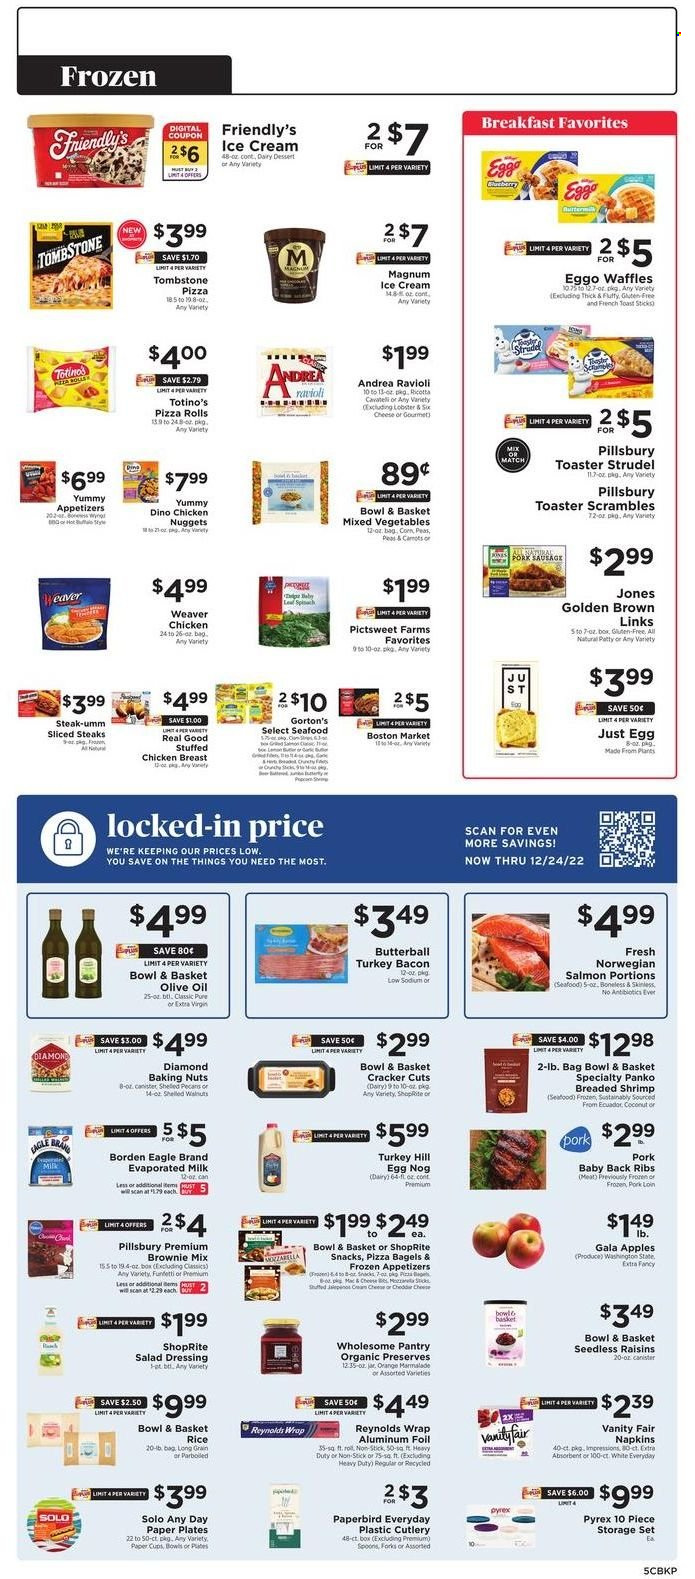 thumbnail - ShopRite Flyer - 11/27/2022 - 12/03/2022 - Sales products - bagels, pizza rolls, strudel, Bowl & Basket, waffles, brownie mix, panko breadcrumbs, corn, apples, Gala, oranges, coconut, lobster, salmon, seafood, shrimps, Gorton's, ravioli, pizza, nuggets, Pillsbury, chicken nuggets, stuffed chicken, bacon, Butterball, turkey bacon, sausage, pork sausage, evaporated milk, eggs, ice cream, Friendly's Ice Cream, mixed vegetables, cheese sticks, snack, crackers, rice, salad dressing, dressing, extra virgin olive oil, olive oil, raisins, walnuts, pecans, dried fruit, steak, pork loin, pork meat, pork ribs, pork back ribs, napkins, spoon, plate, canister, cup, disposable cutlery, Pyrex, aluminium foil, storage container set, jar, paper, paper plate, party cups, bra. Page 5.